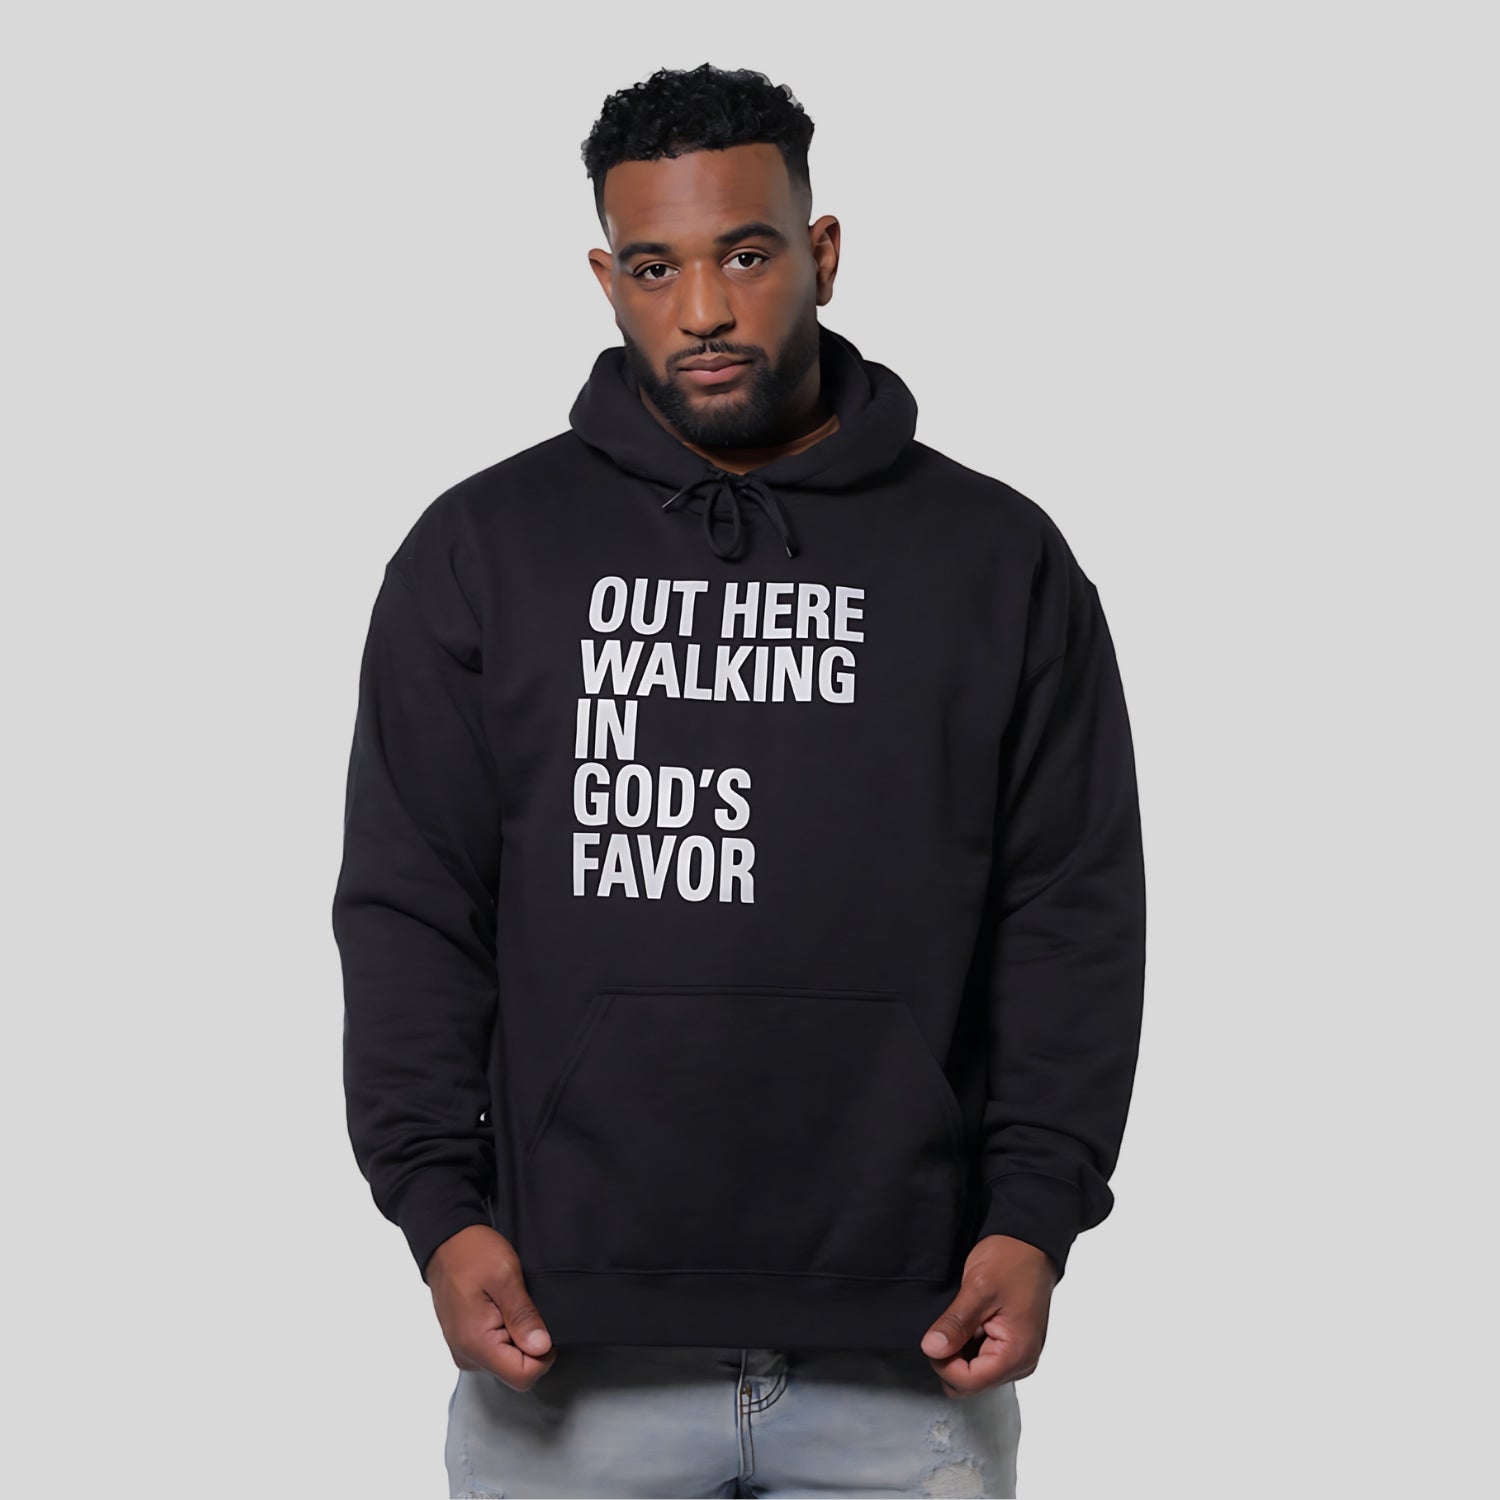 Walking in God's Favor, Christian Hoodies, God Shirts, Christian T-Shirts, Used By God, God is Dope, Art of Homage, Elevated Faith, Faith Shirts, Christian Apparel, Christian Clothing, Women's Christian T-Shirt, Men's Christian T-Shirt, Christian Tee